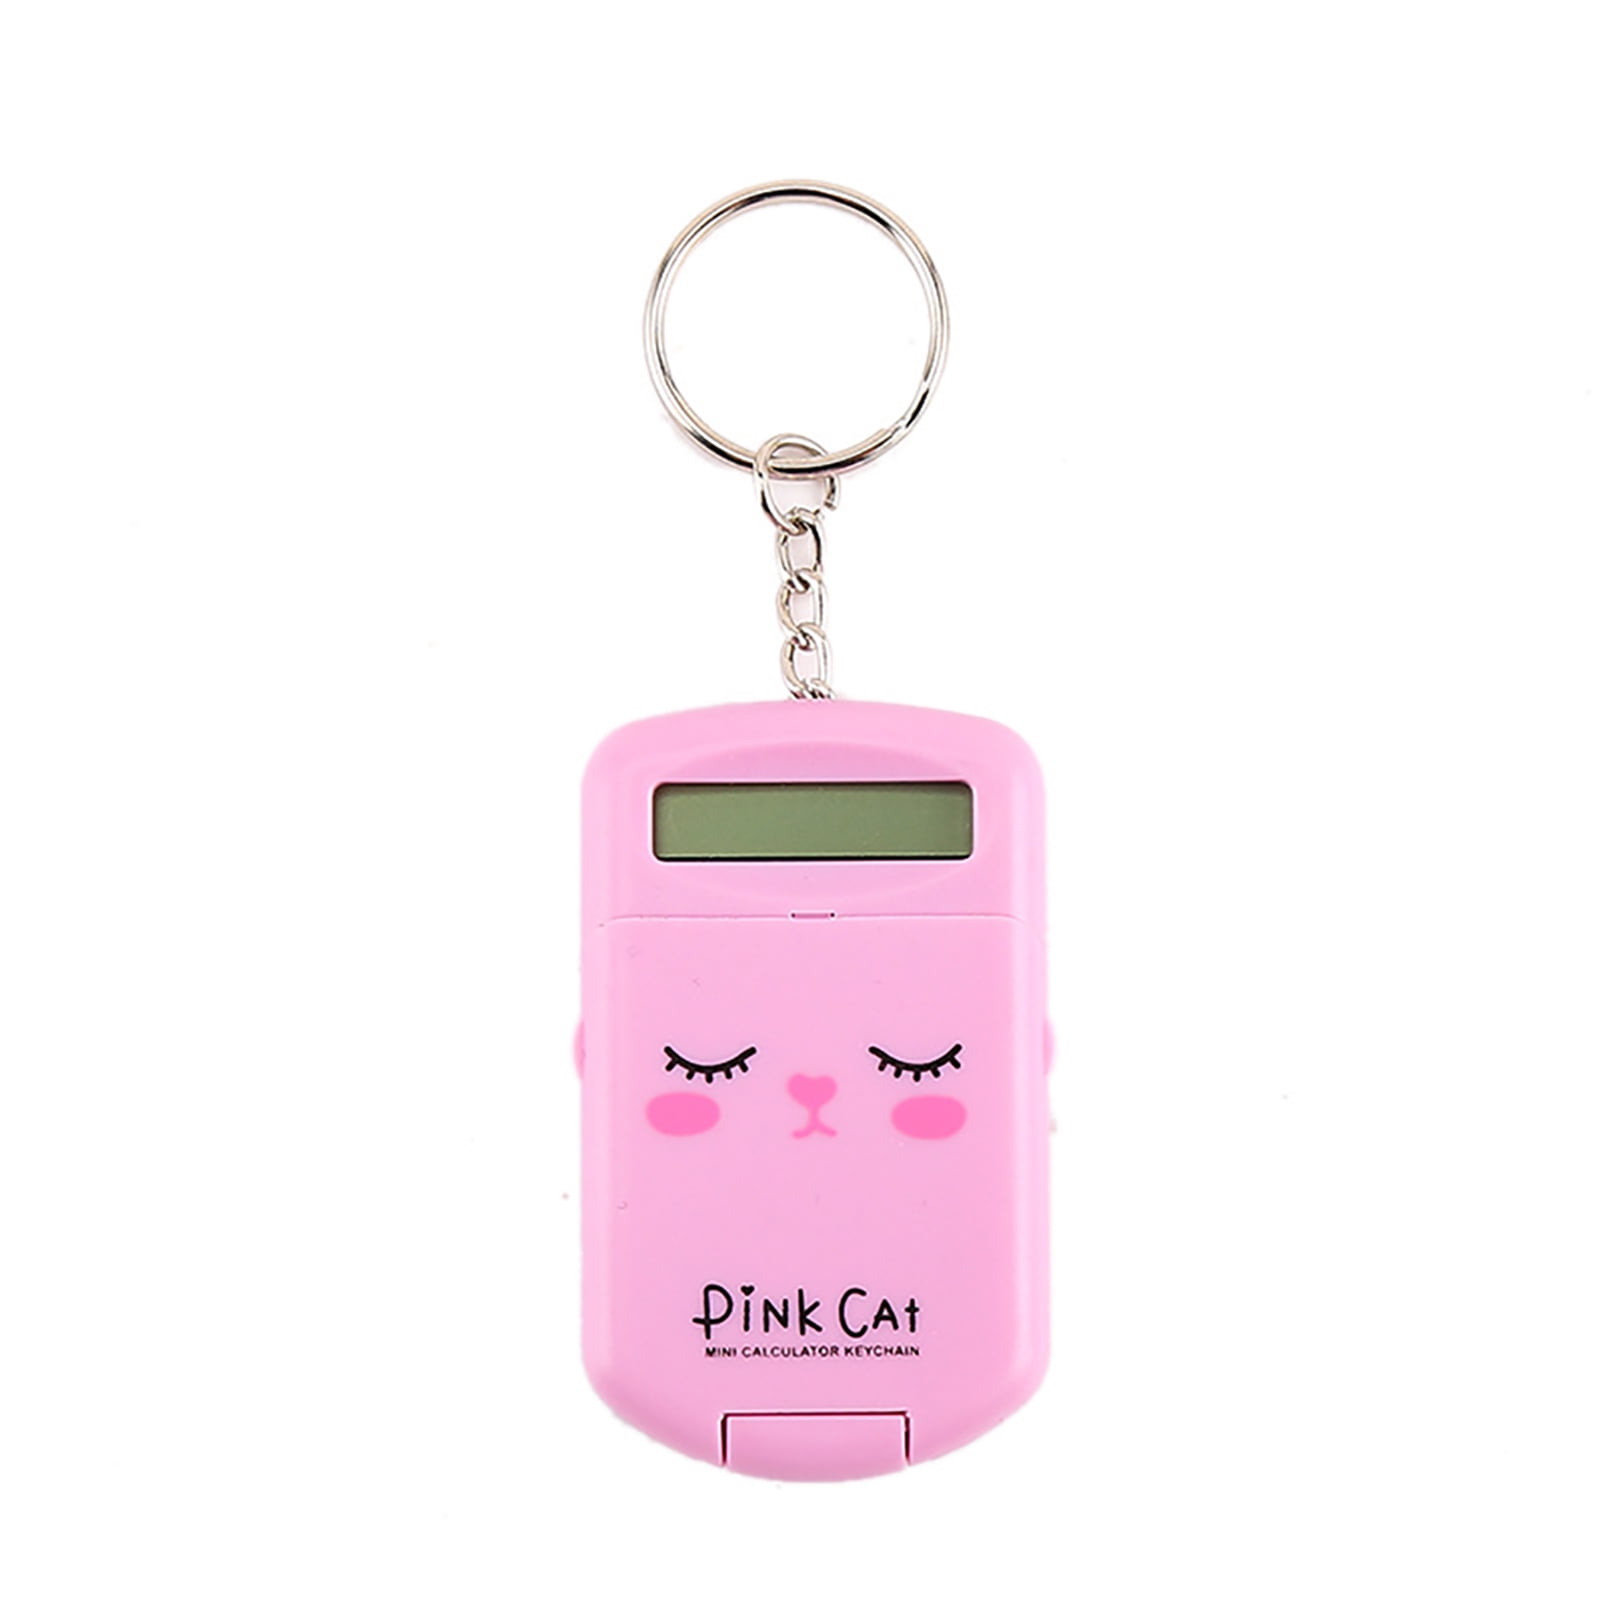 Details about   Portable Pocket Cute Calculator School Office LCD Digital 8 Digits Work Travel 